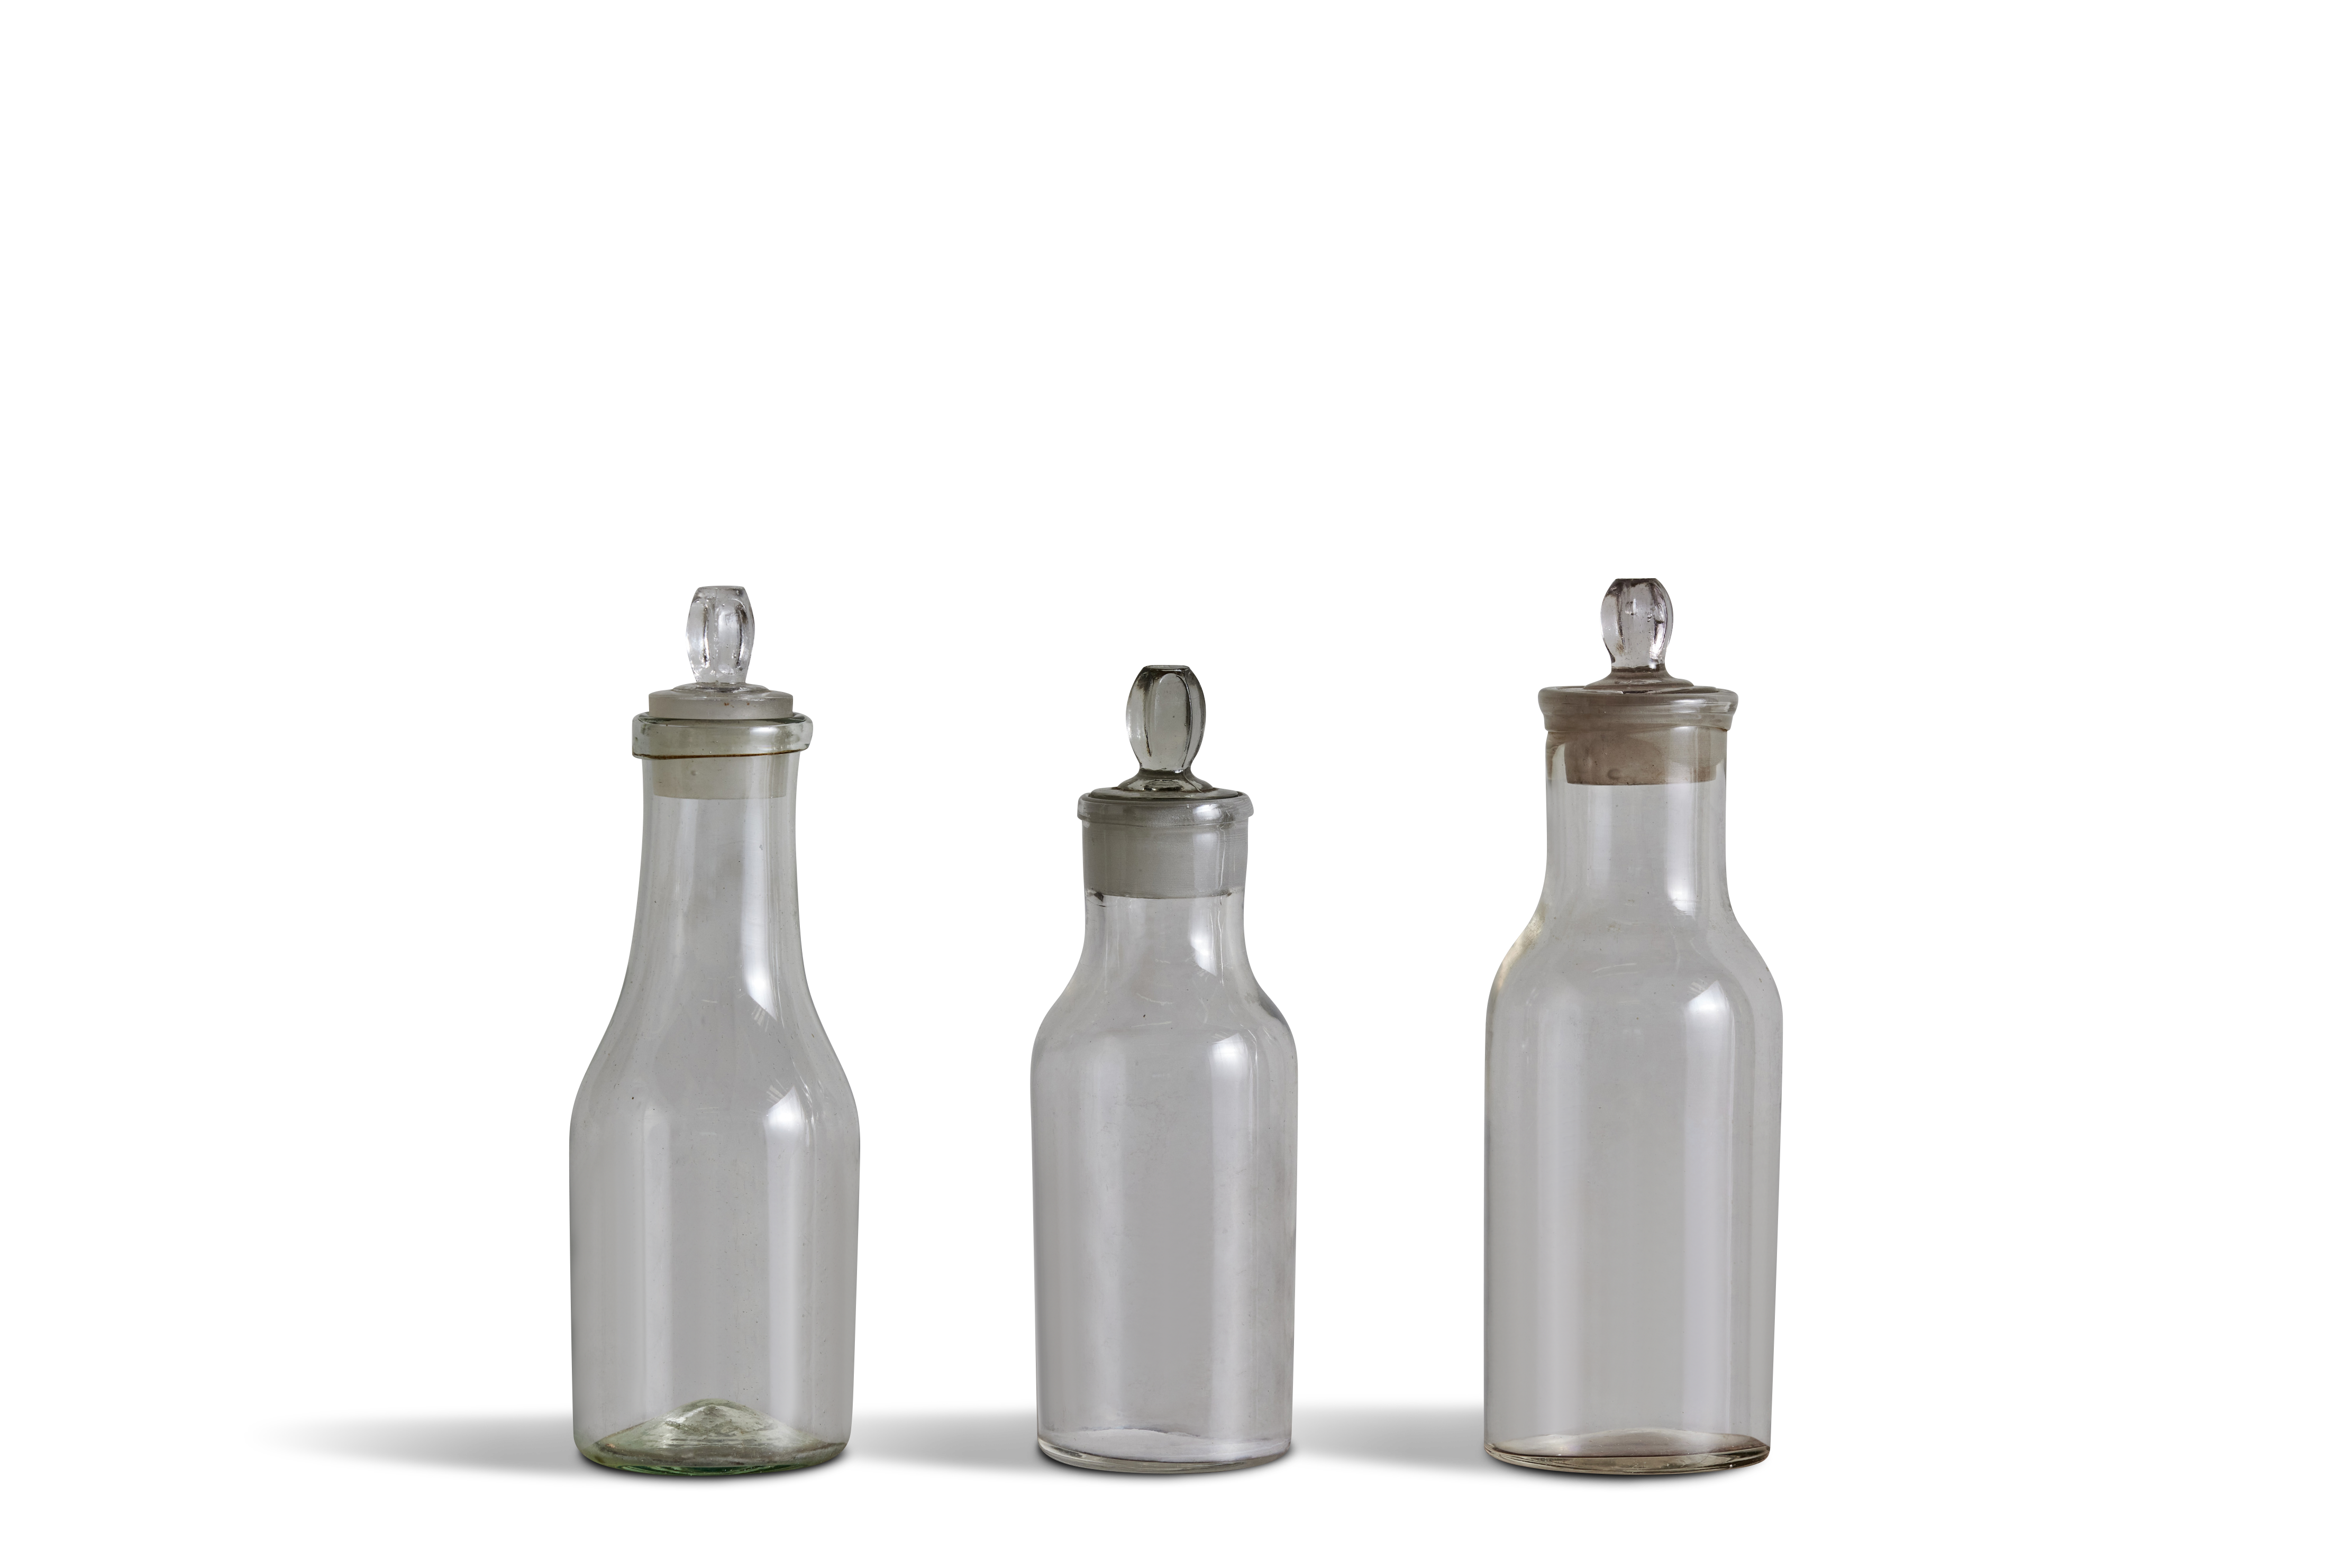 French Apothecary Jars